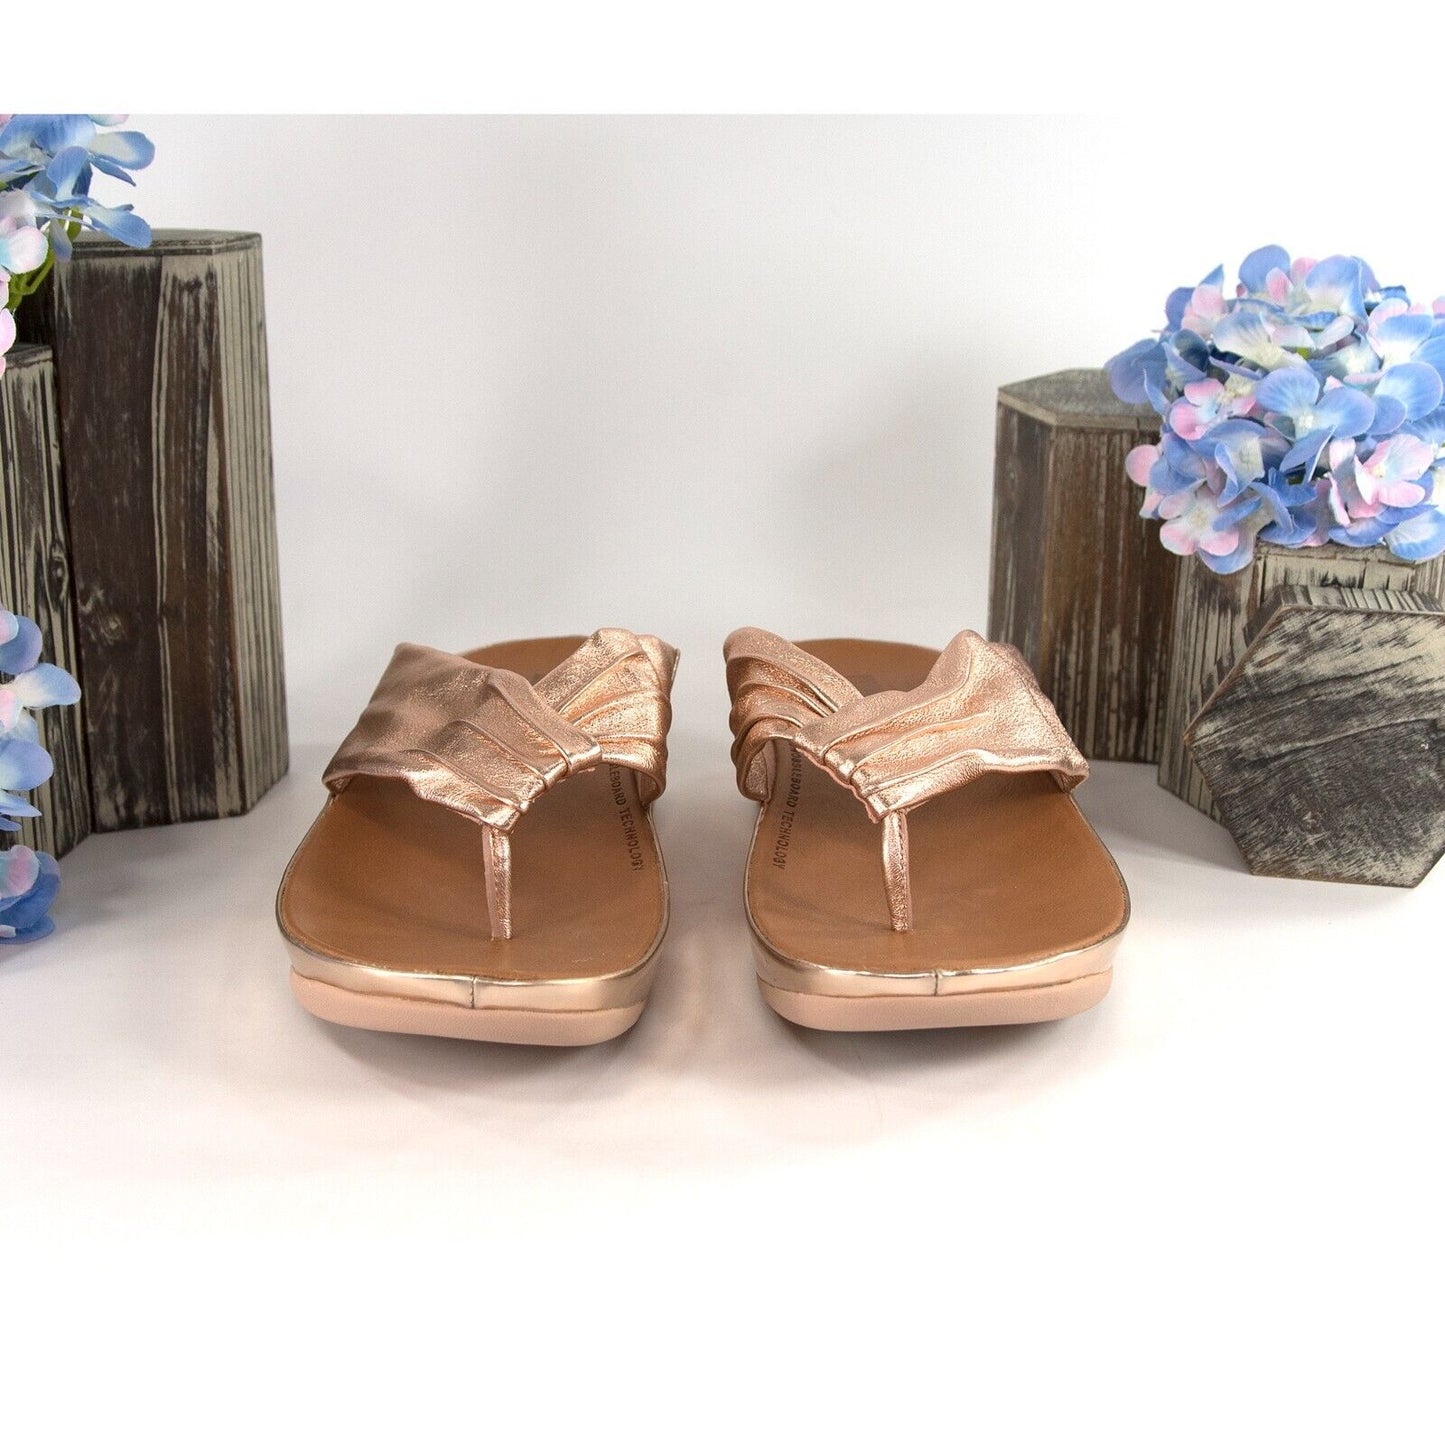 FitFlop Twiss Rose Gold Leather Slides Mule Wedge Sandals Size 39 NIB